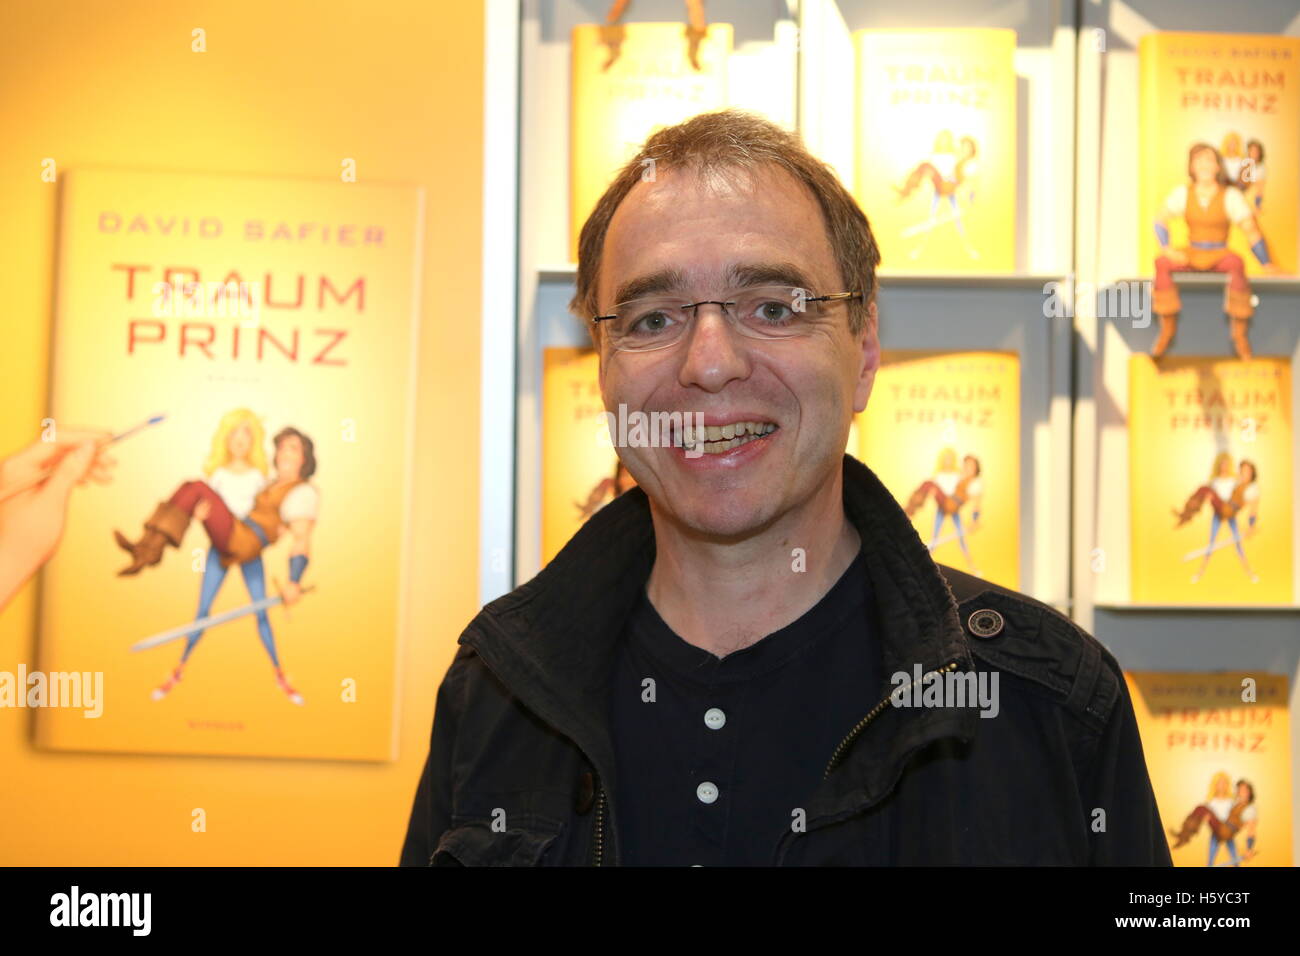 David Safier presenting his new book 'Traumprinz' (lit. 'Dream Prince') at the stand of Rowohlt publisher at the Frankfurt Book Fair in Frankfurt/Main, Germany, 20 October 2016. PHOTO: SUSANNAH V. VERGAU/dpa - NO WIRE SERVICE - Stock Photo